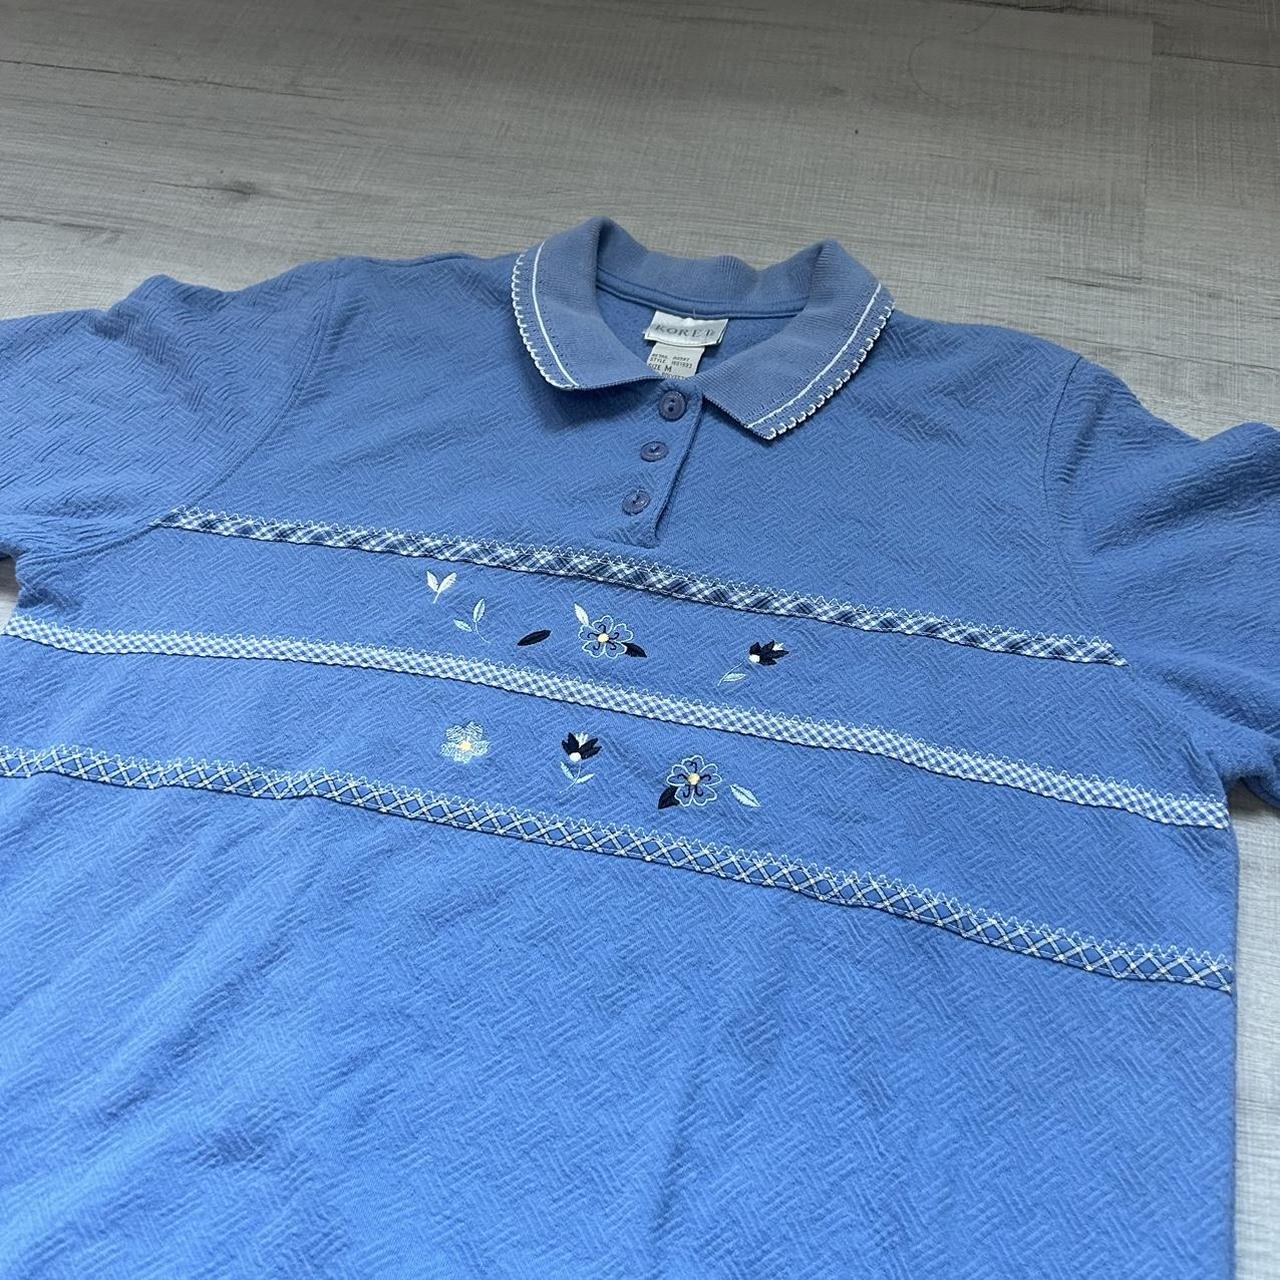 vintage blue collared shirt ‧₊˚ 彡 -perfect for a... - Depop